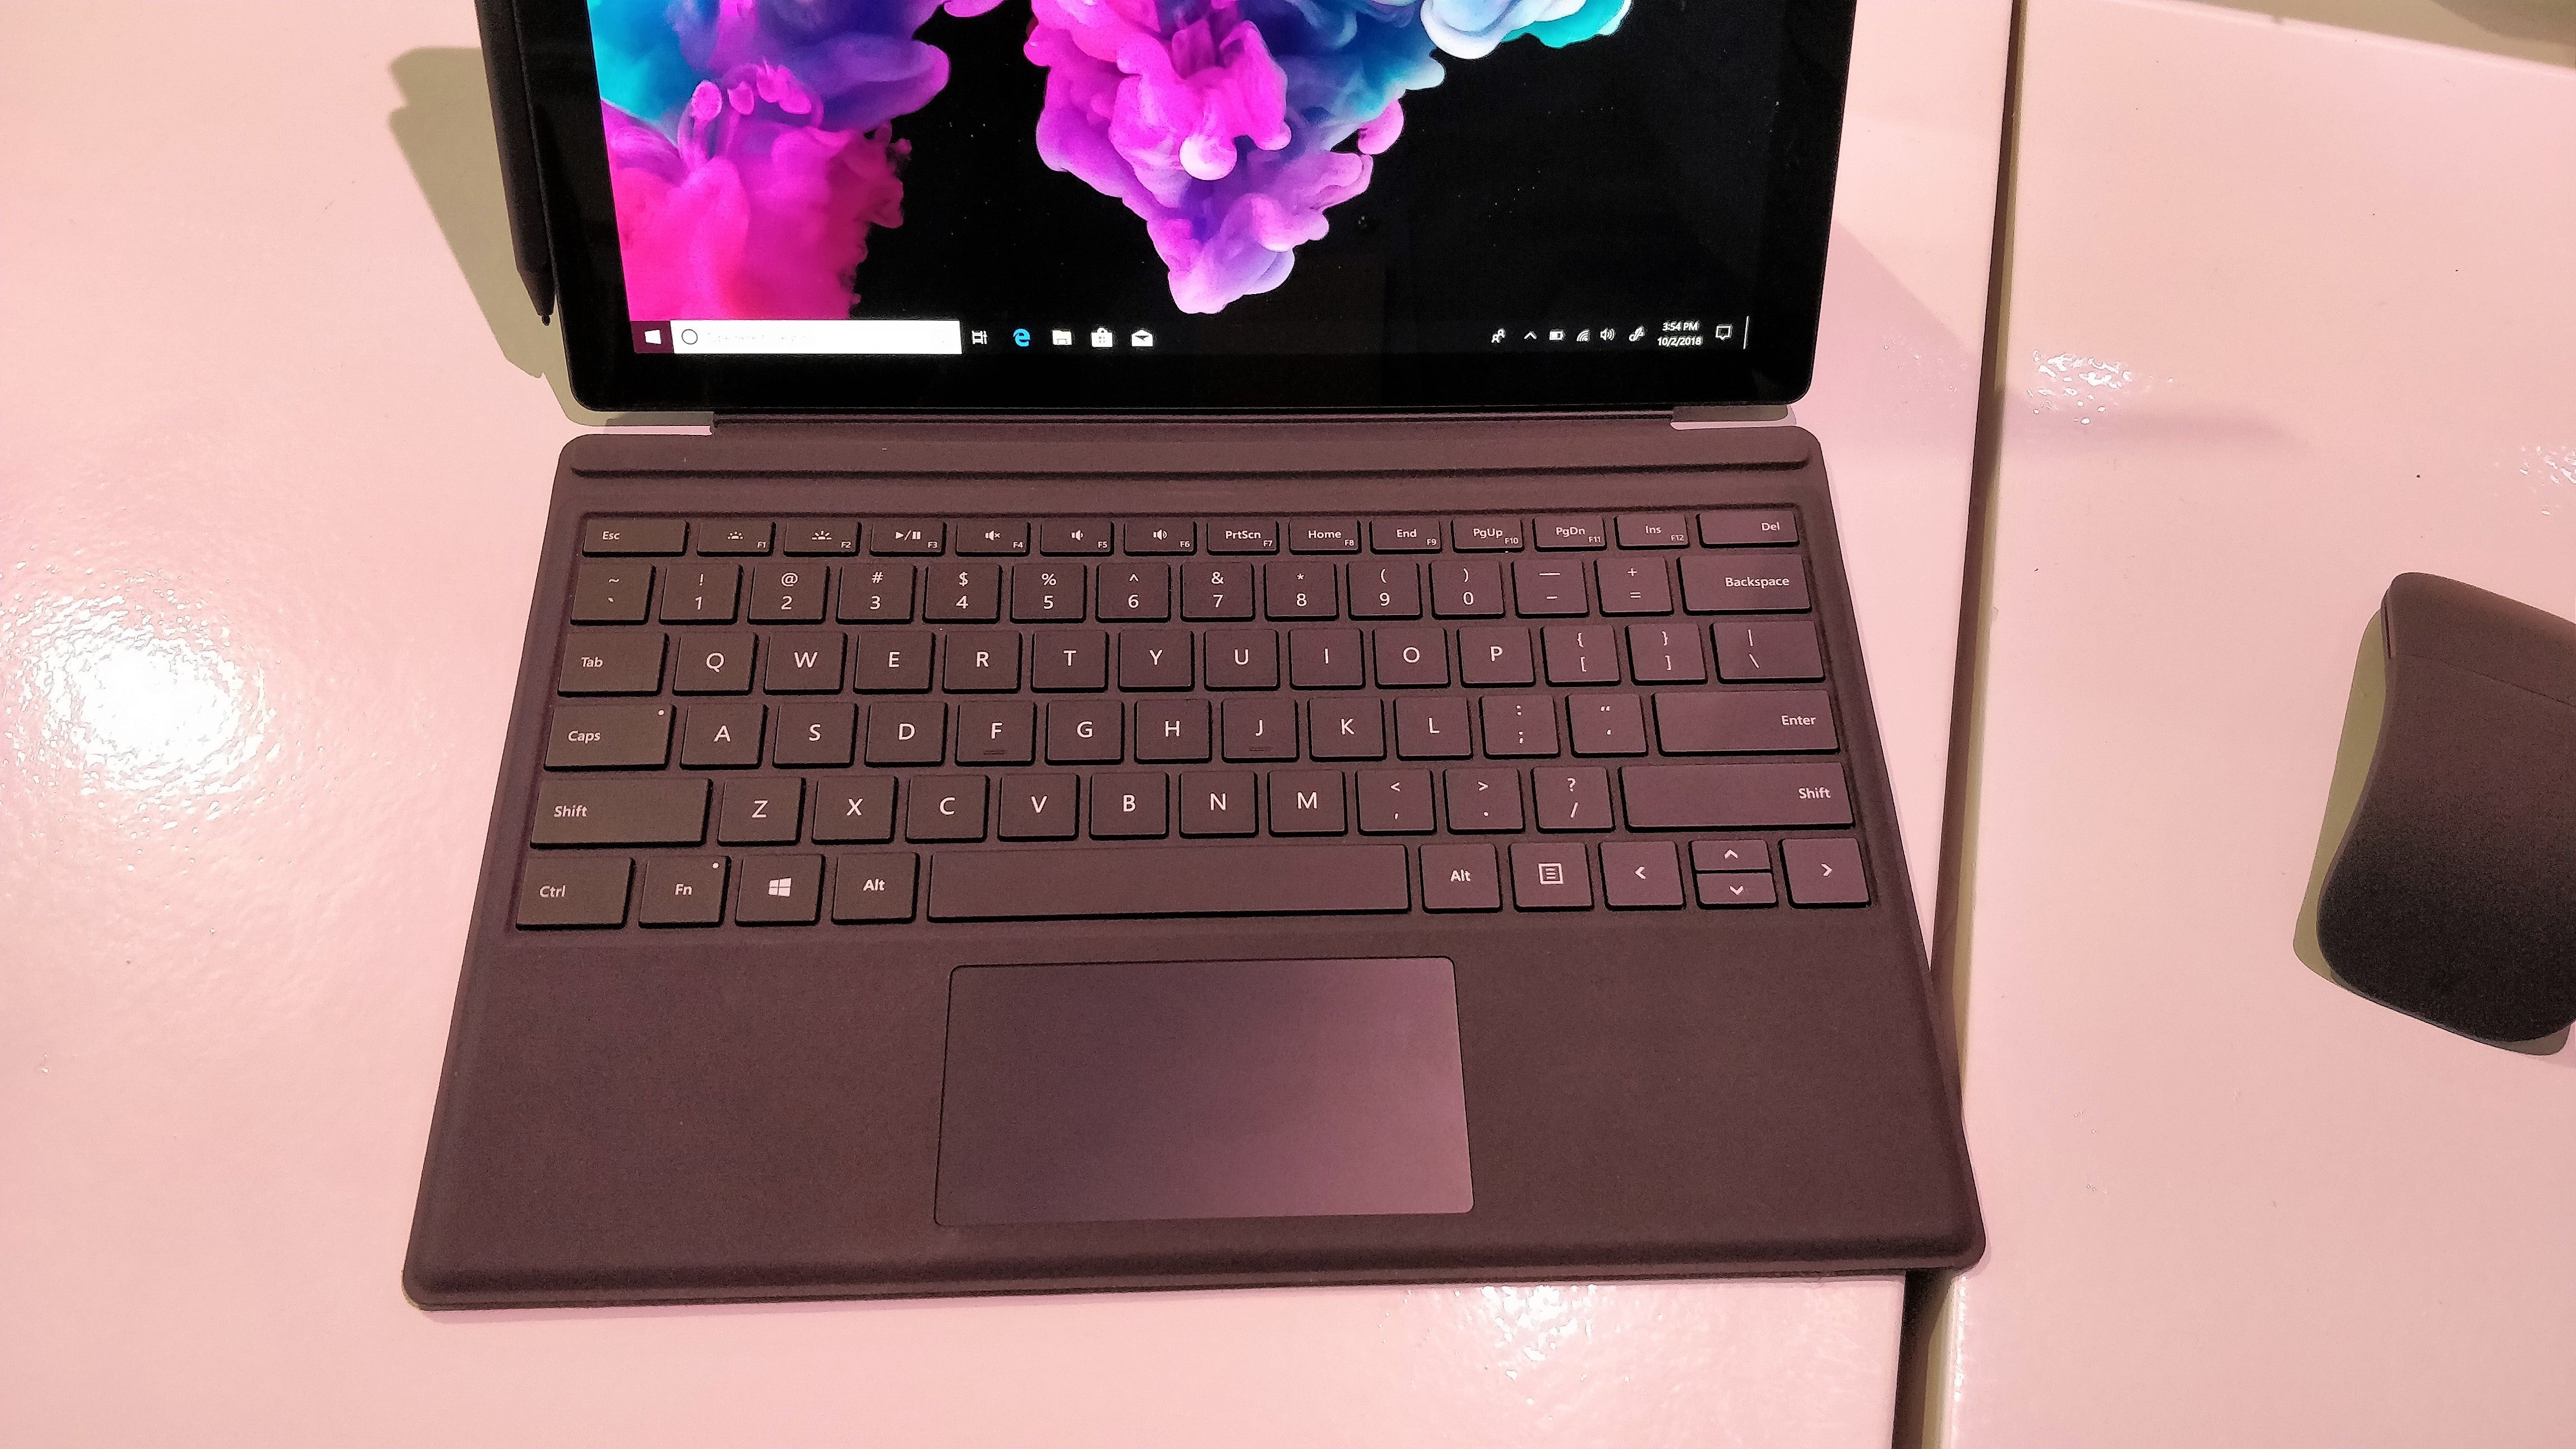 Hands on with Microsoft's Surface Pro 6: The new tablet is easy to use